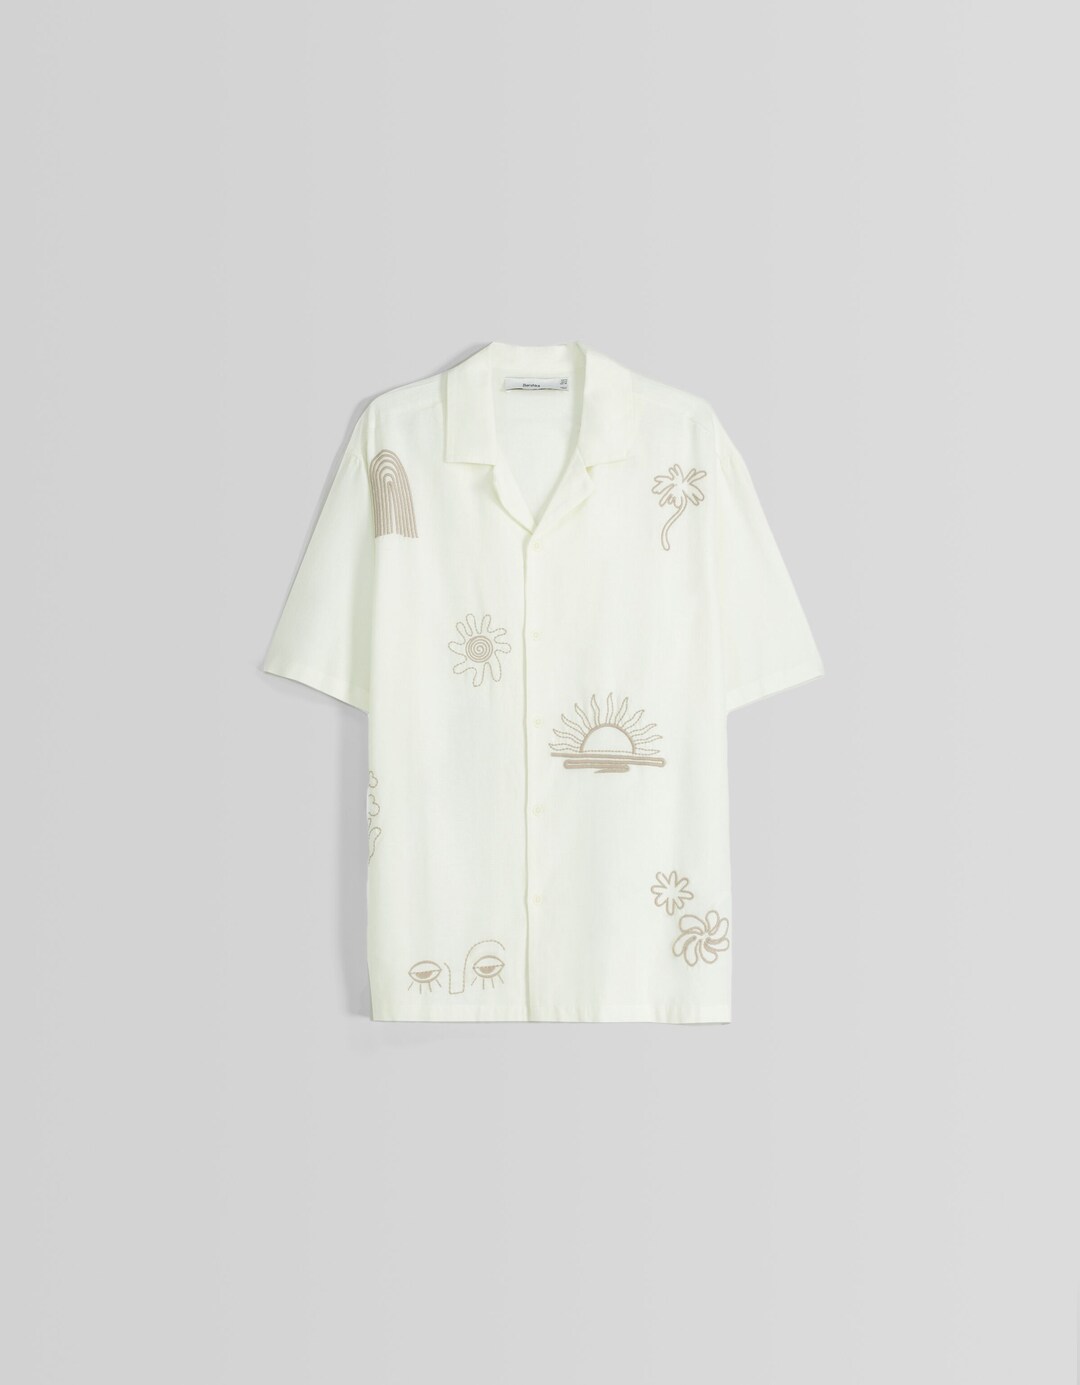 Rustic short sleeve shirt with embroidery